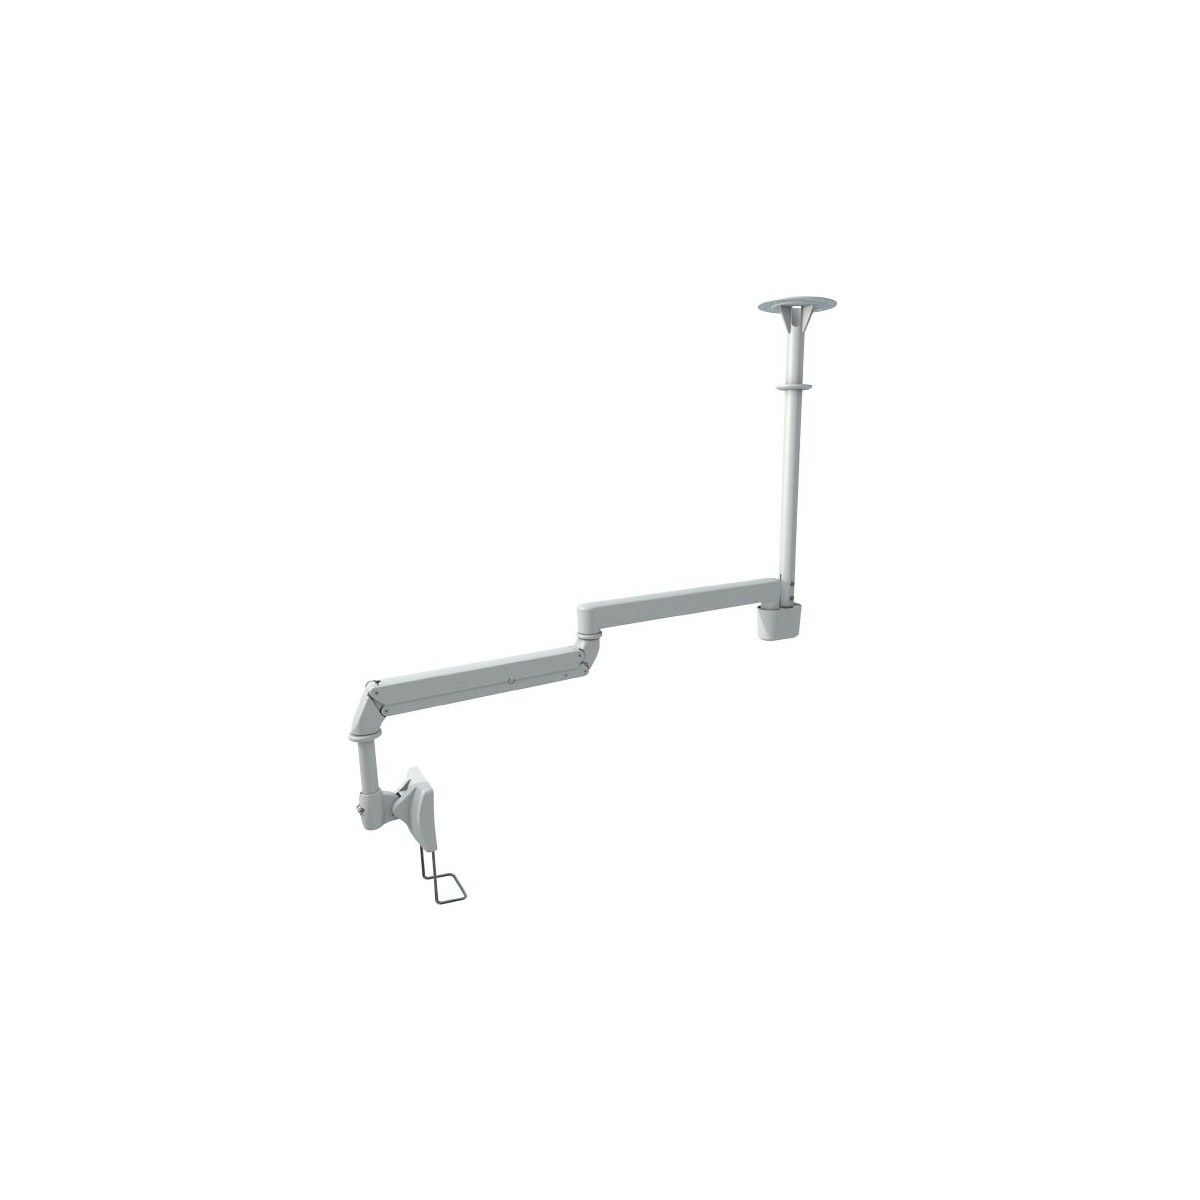 Aavara AMR20L Cantilever Medical ARM (Capacity 6-12kg) - Ceiling Type